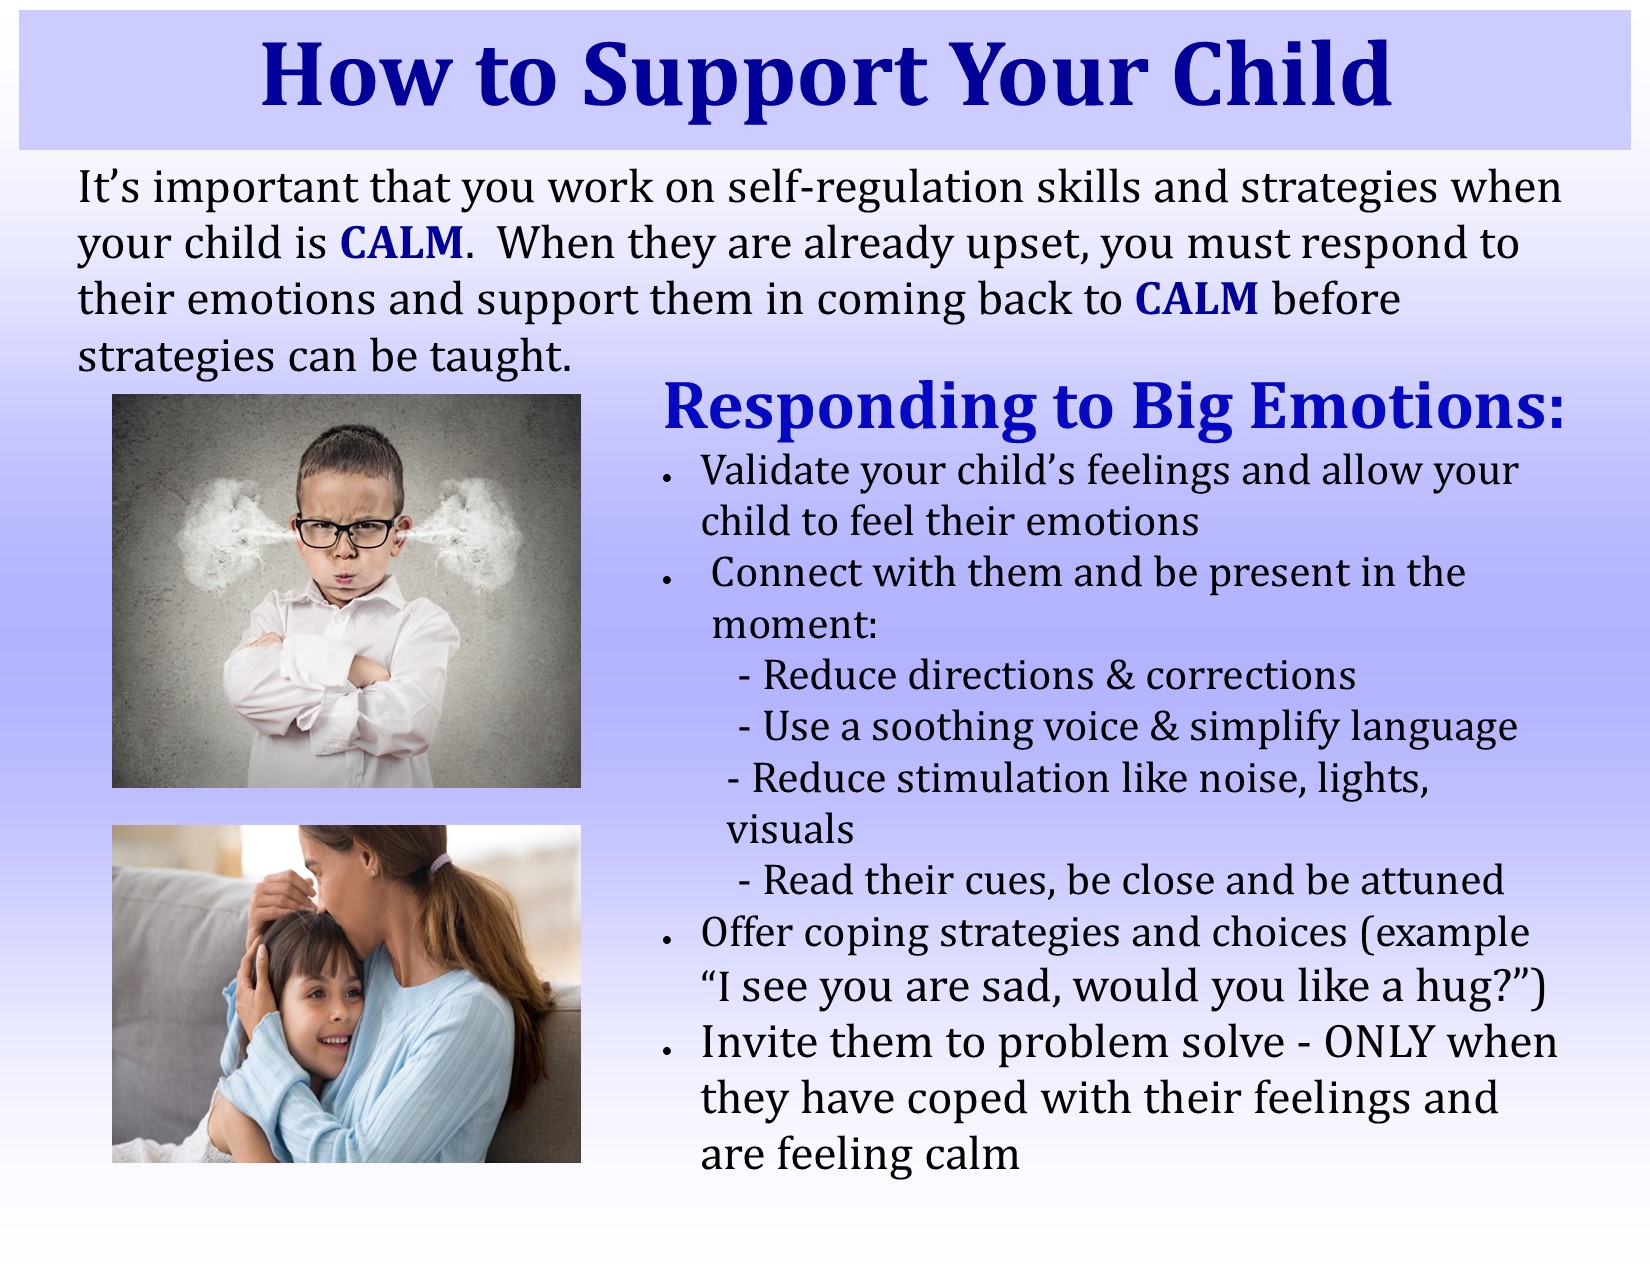 How to support your child